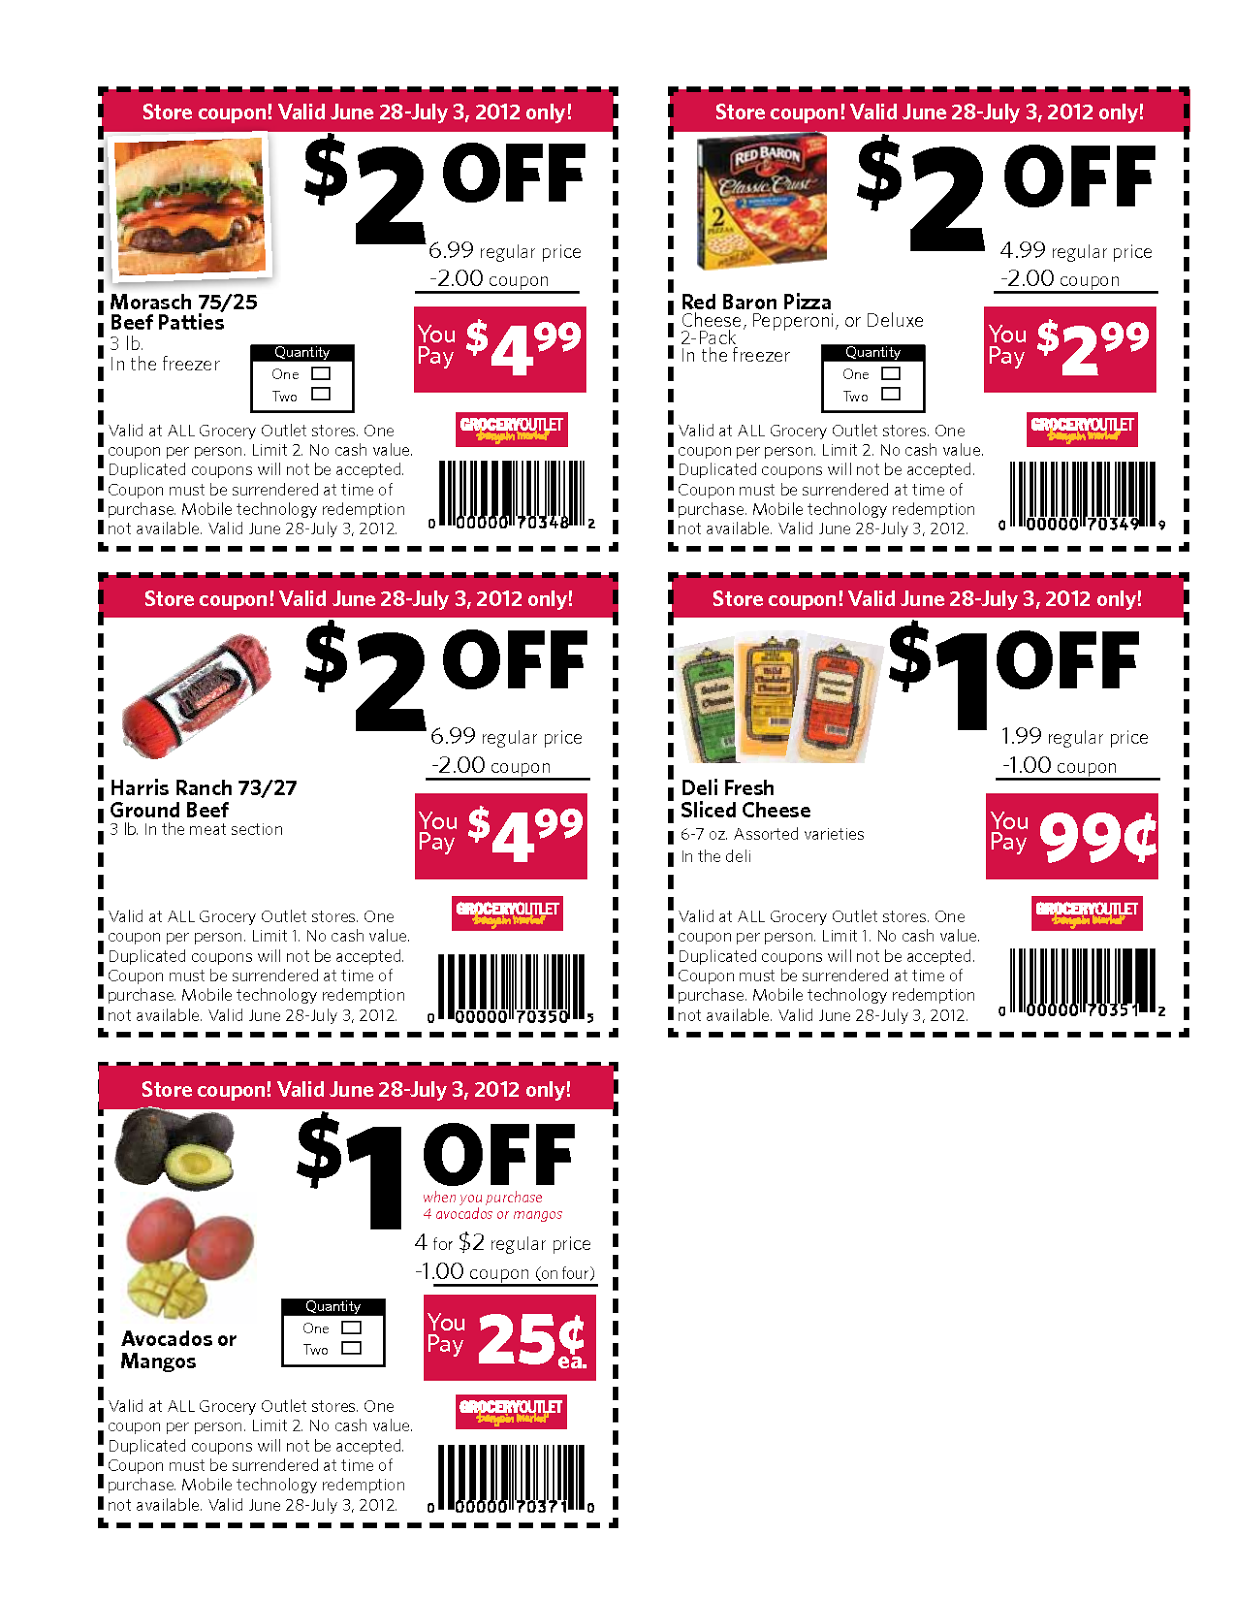 community-coffee-printable-coupon-new-coupons-and-deals-printable